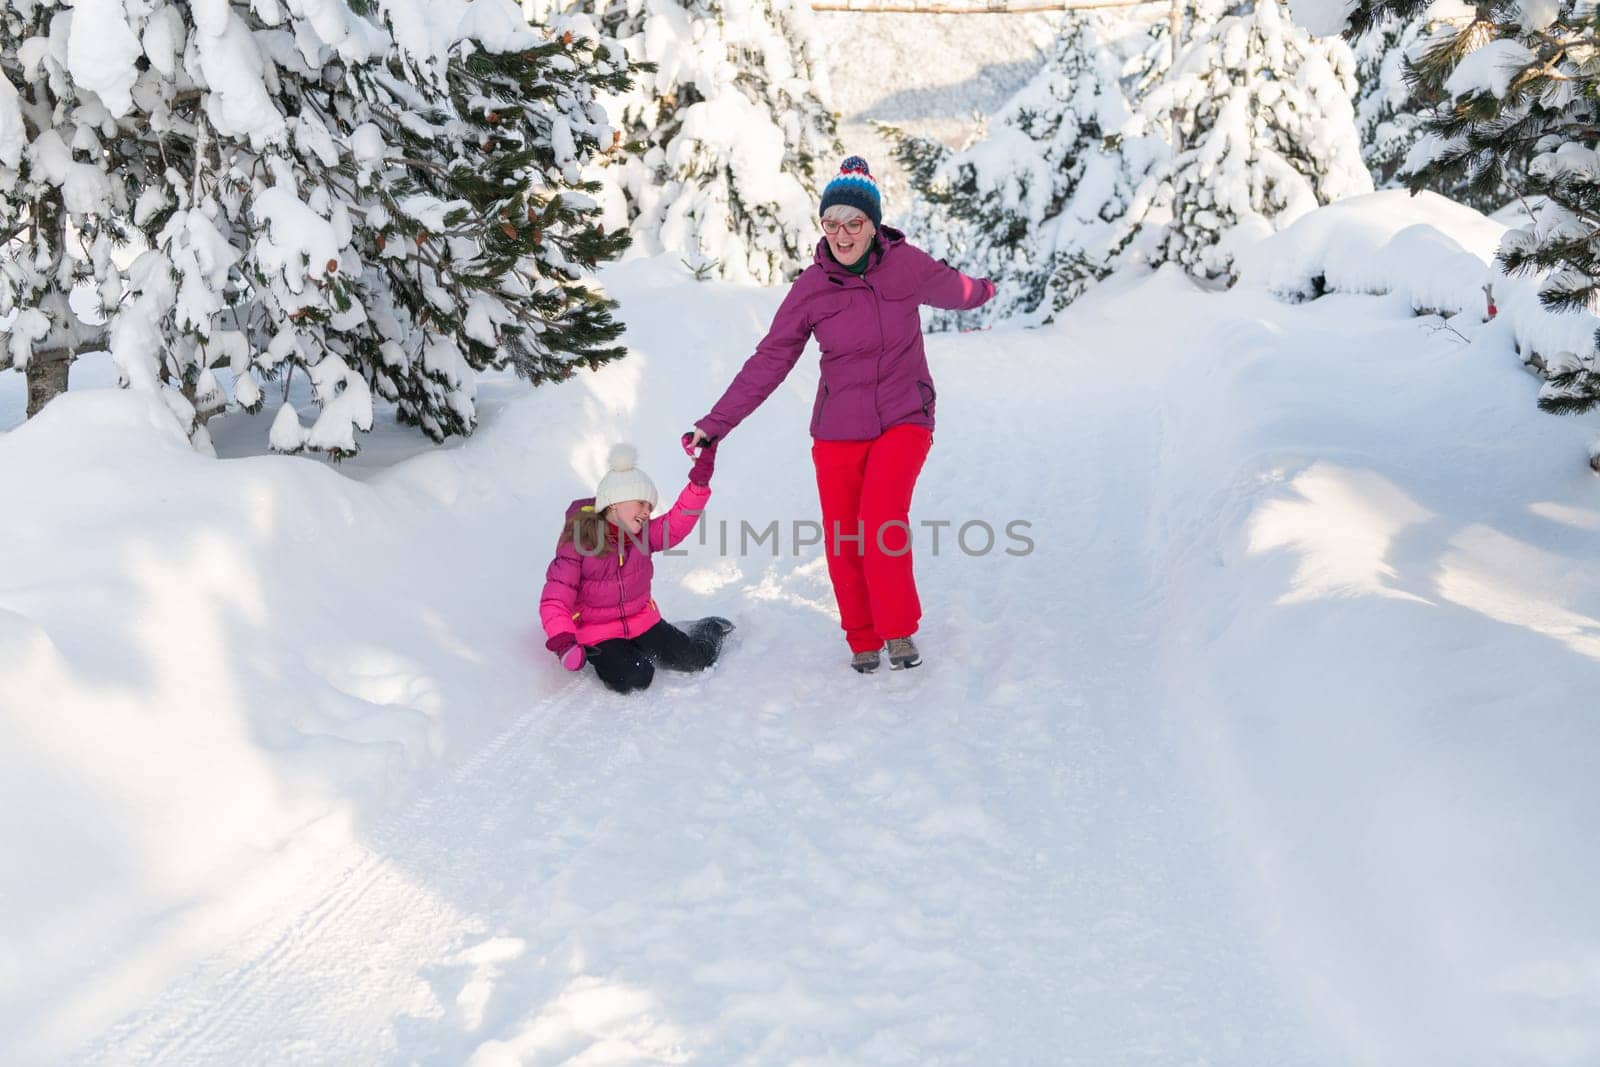 A mother and daughter as they dash along a serene snowy path, embracing the tranquil beauty of their winter mountain getaway.